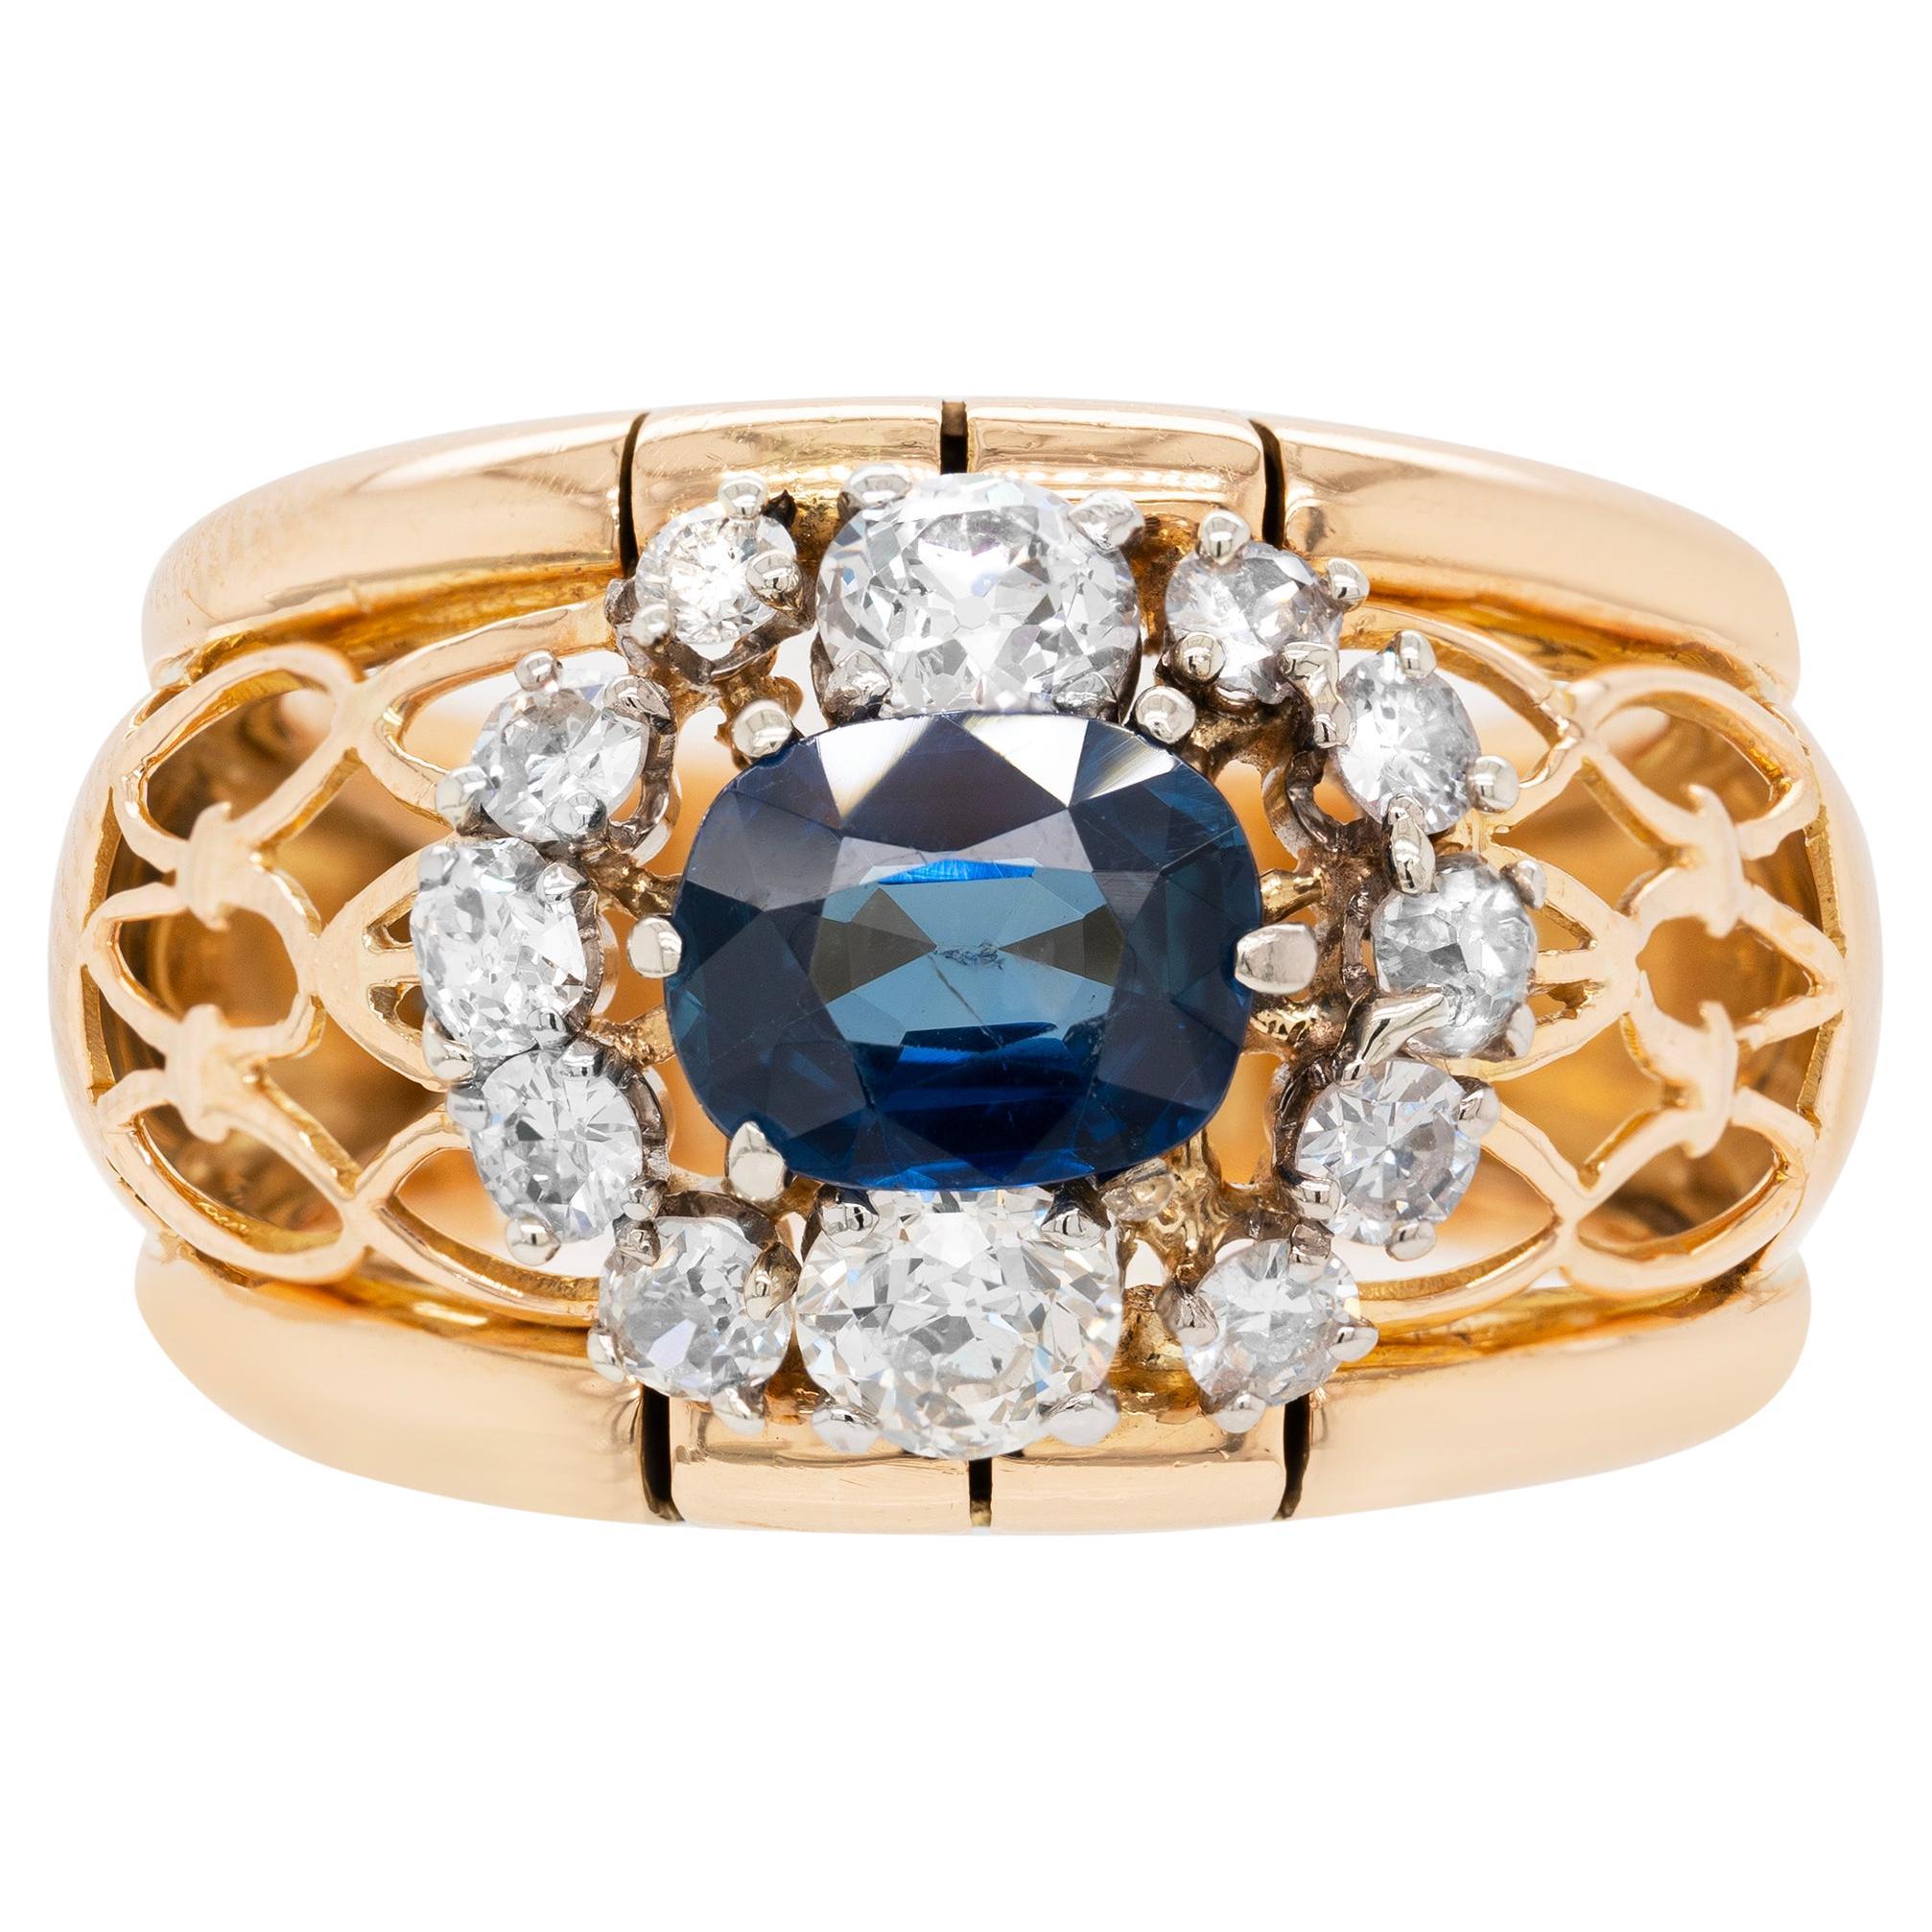 1.49ct Natural Unheated Blue Sapphire & Diamond 18k Gold Dress Ring, circa 1940s For Sale